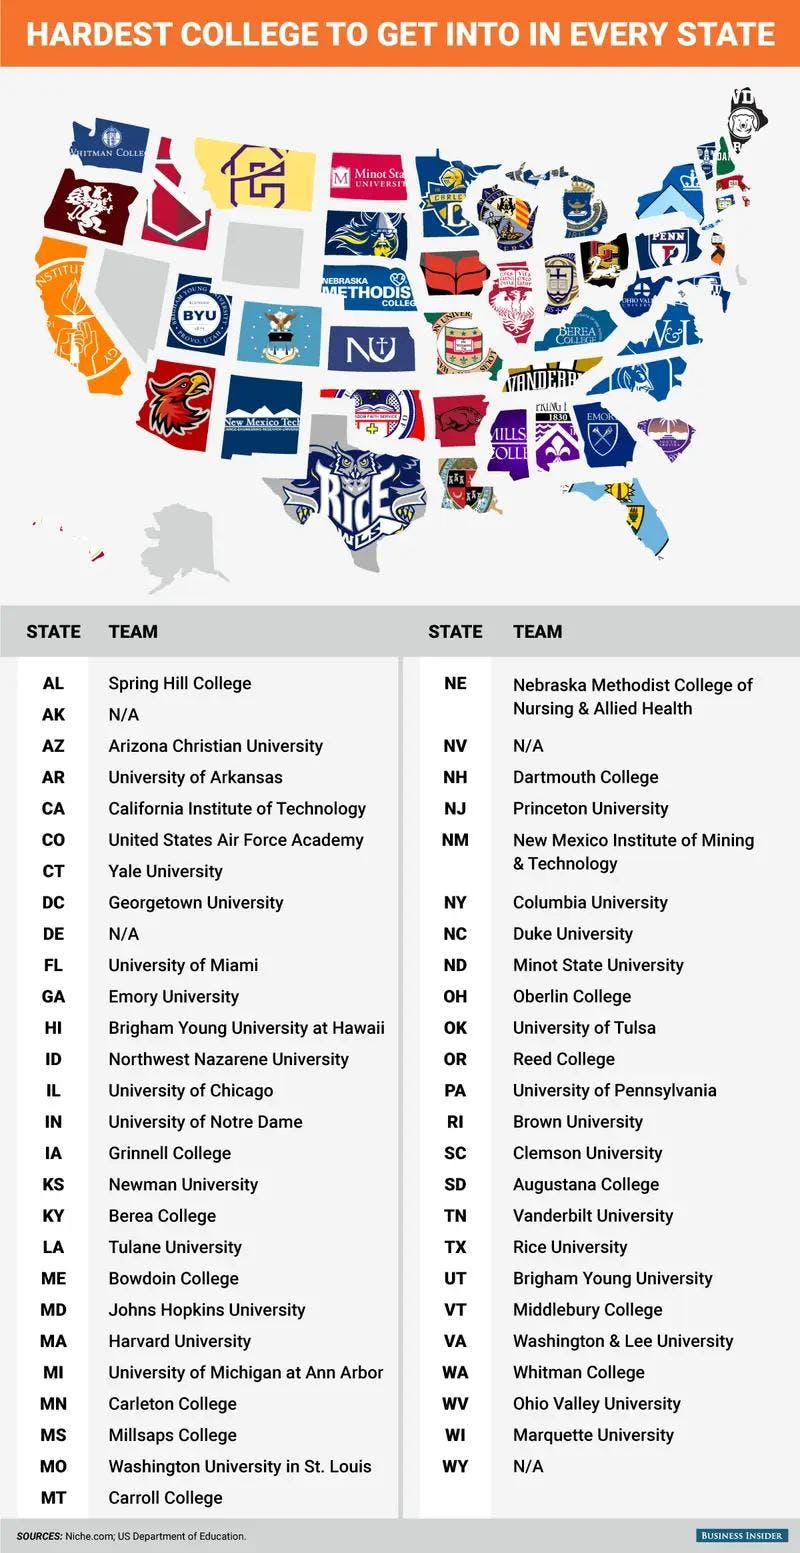 Image showing hardest colleges to get into according to state 